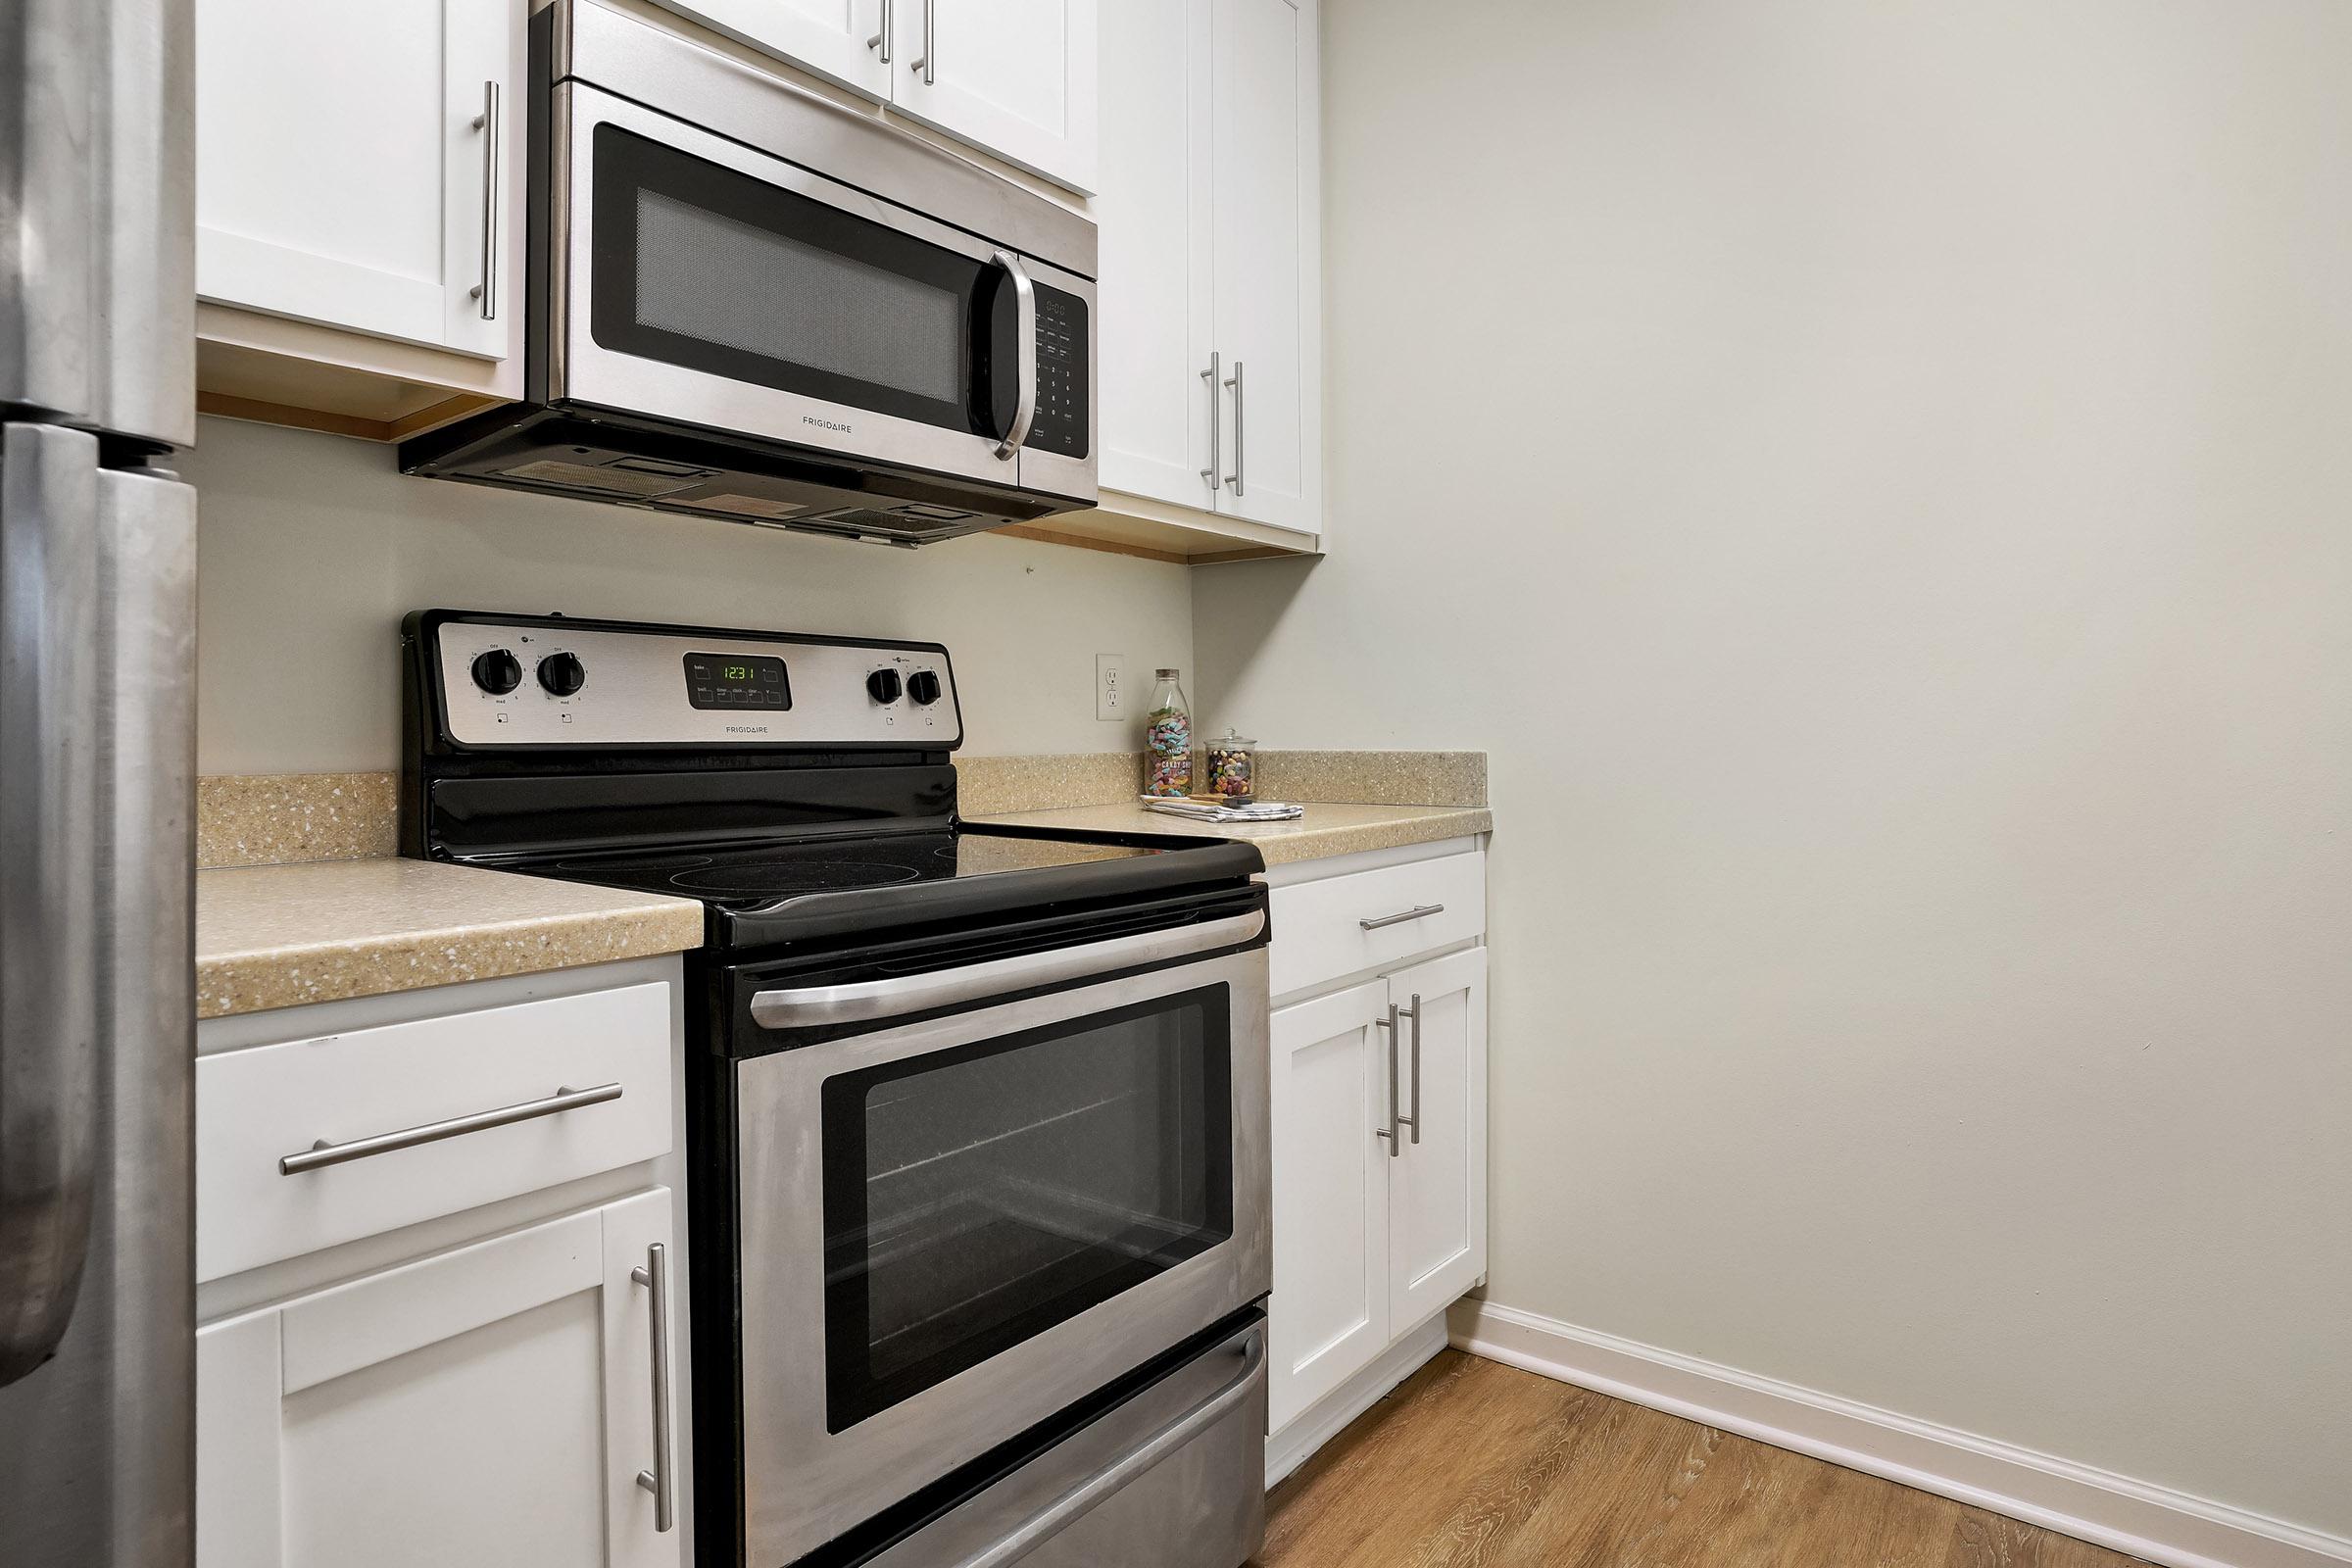 Enjoy An All-electric Kitchen At Elevation In Wilmington, NC